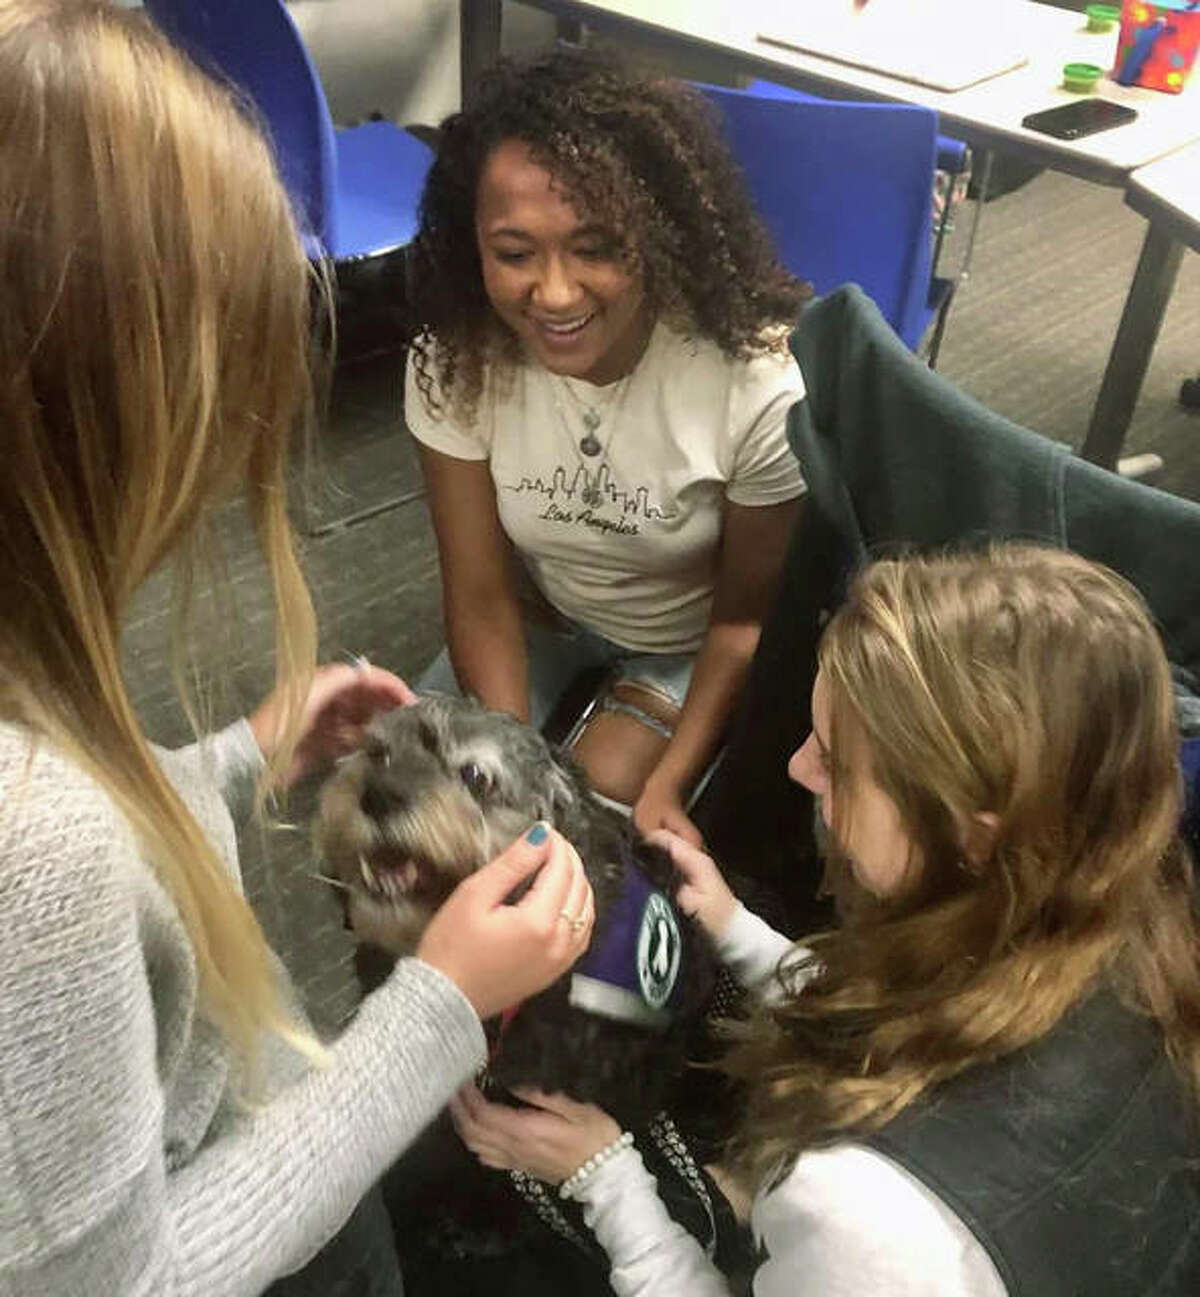 SIUE education students Madison Hamby, Marina Taylor, and Ashley Orr learn first-hand the opportunities presented by having therapy dogs in a classroom setting.